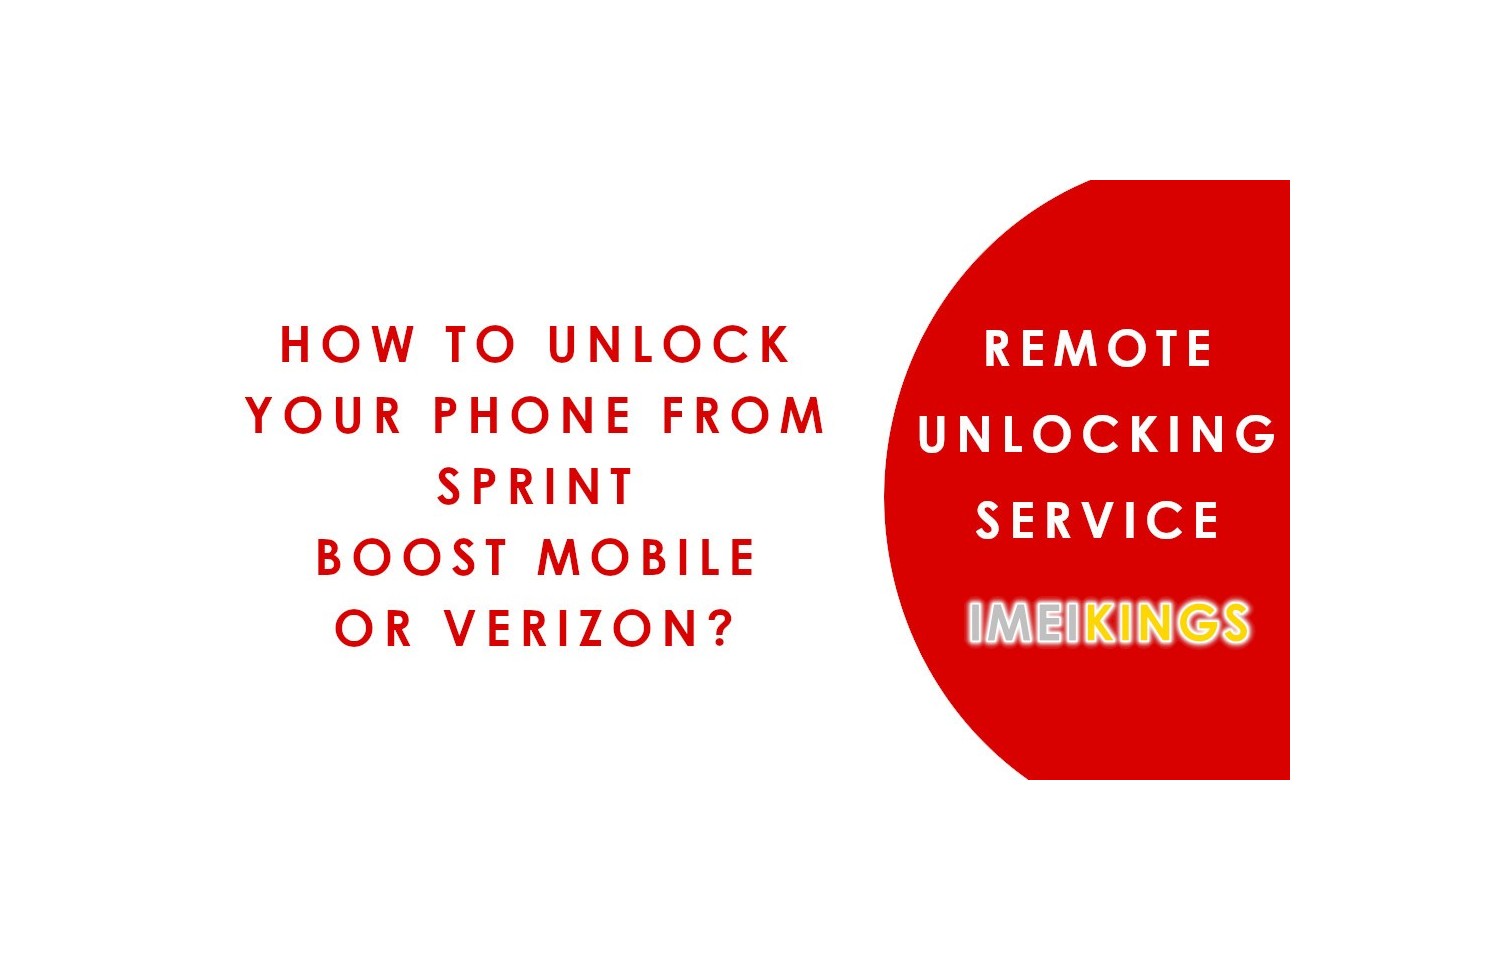 How to Unlock Your Phone from Sprint, Boost Mobile or Verizon